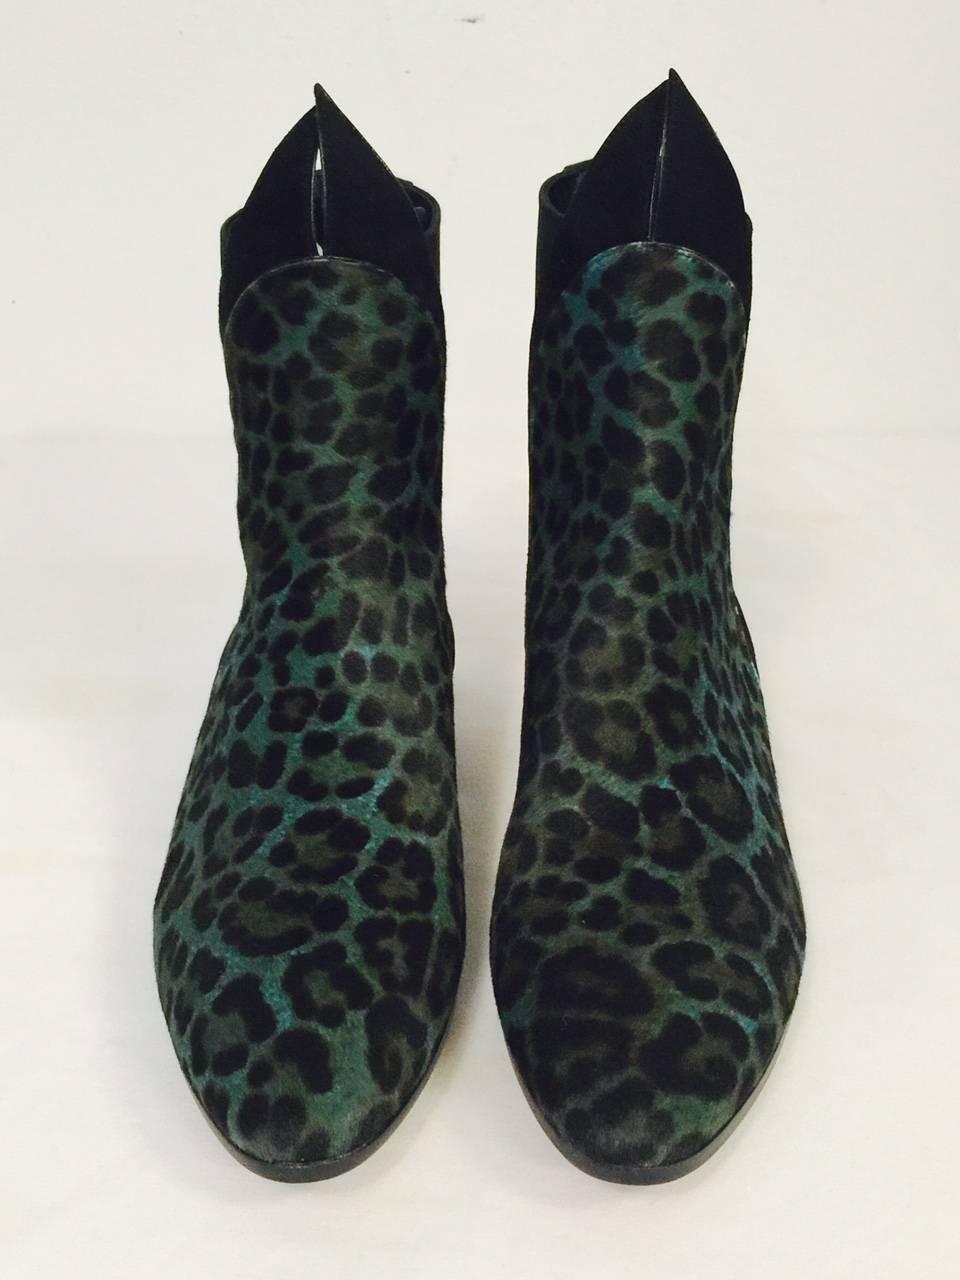 New Alaia Paris Gypsy Leopard Print Calf Boots show why Azzedine Alaia has a devoted following across the globe!  New boots feature luxurious calf hair that has been expertly treated to mimic leopard in shades of blue.  Must be seen to be believed! 